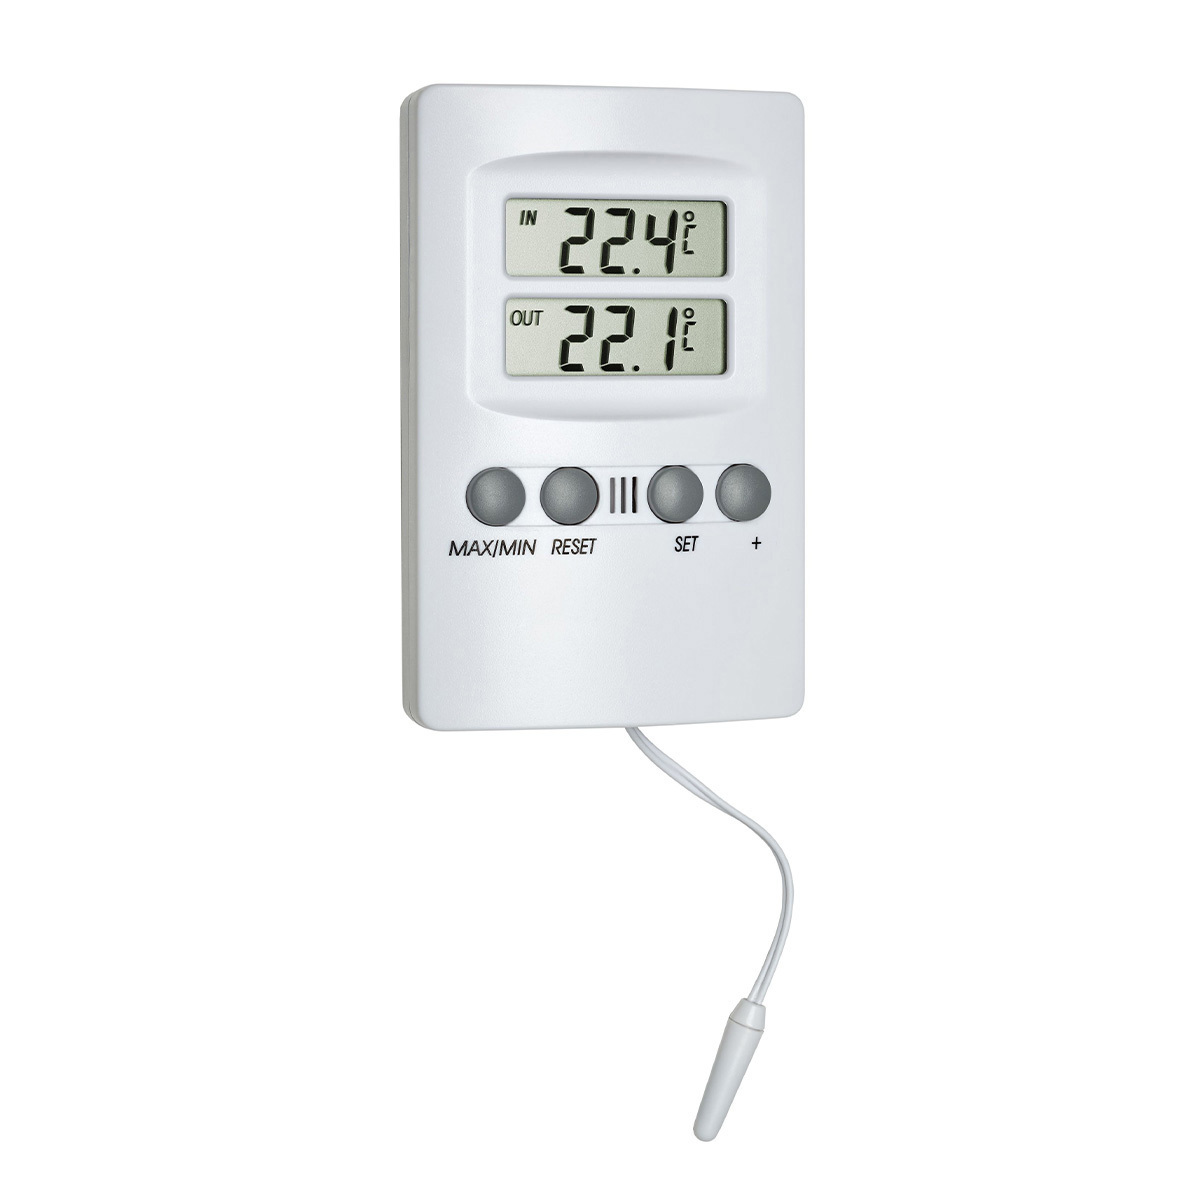 Digital indoor-outdoor thermometer with alarm